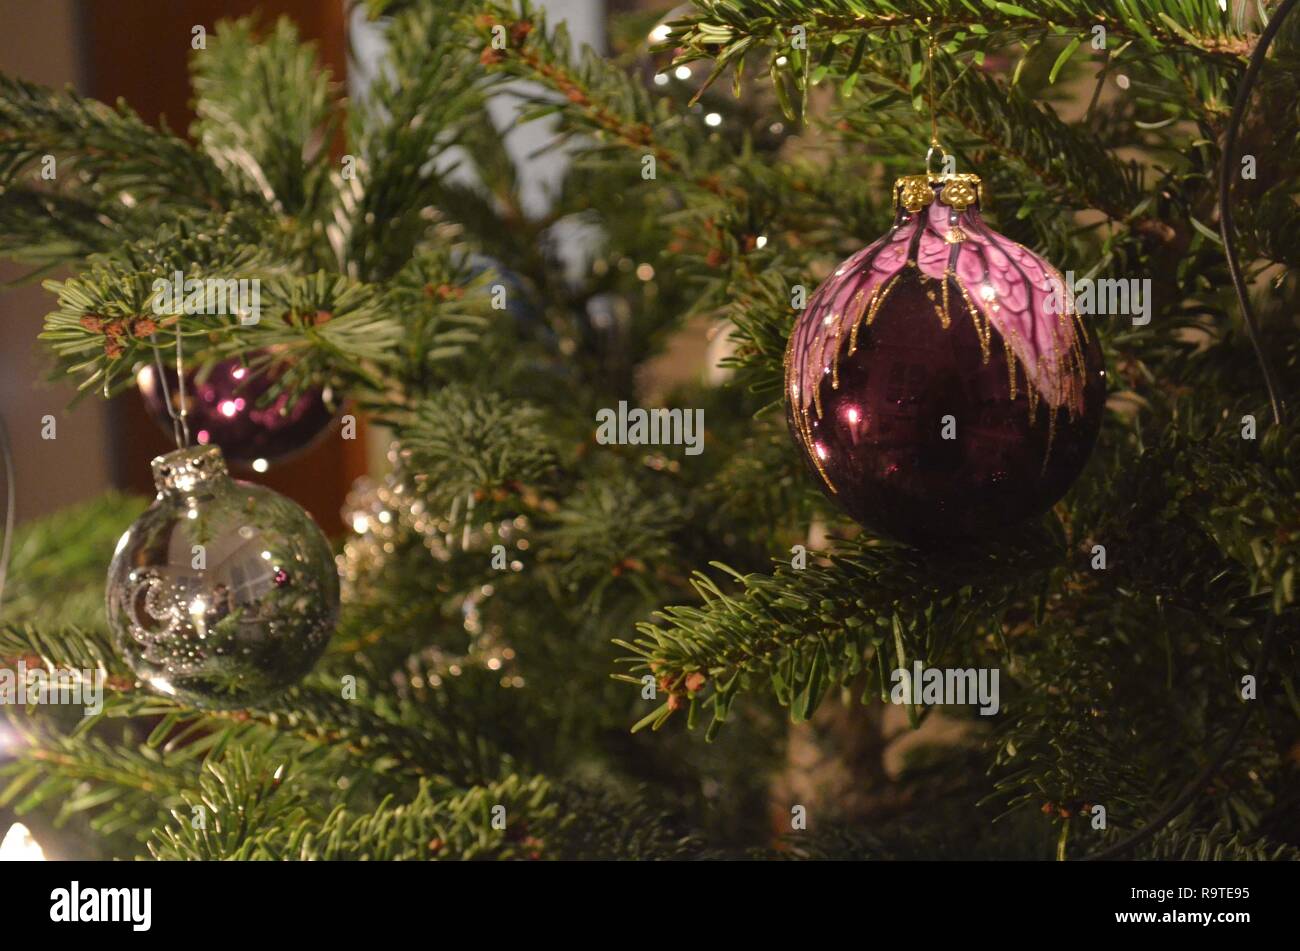 christmas decorations on a tree, purple and silver, ornaments reflecting the light Stock Photo